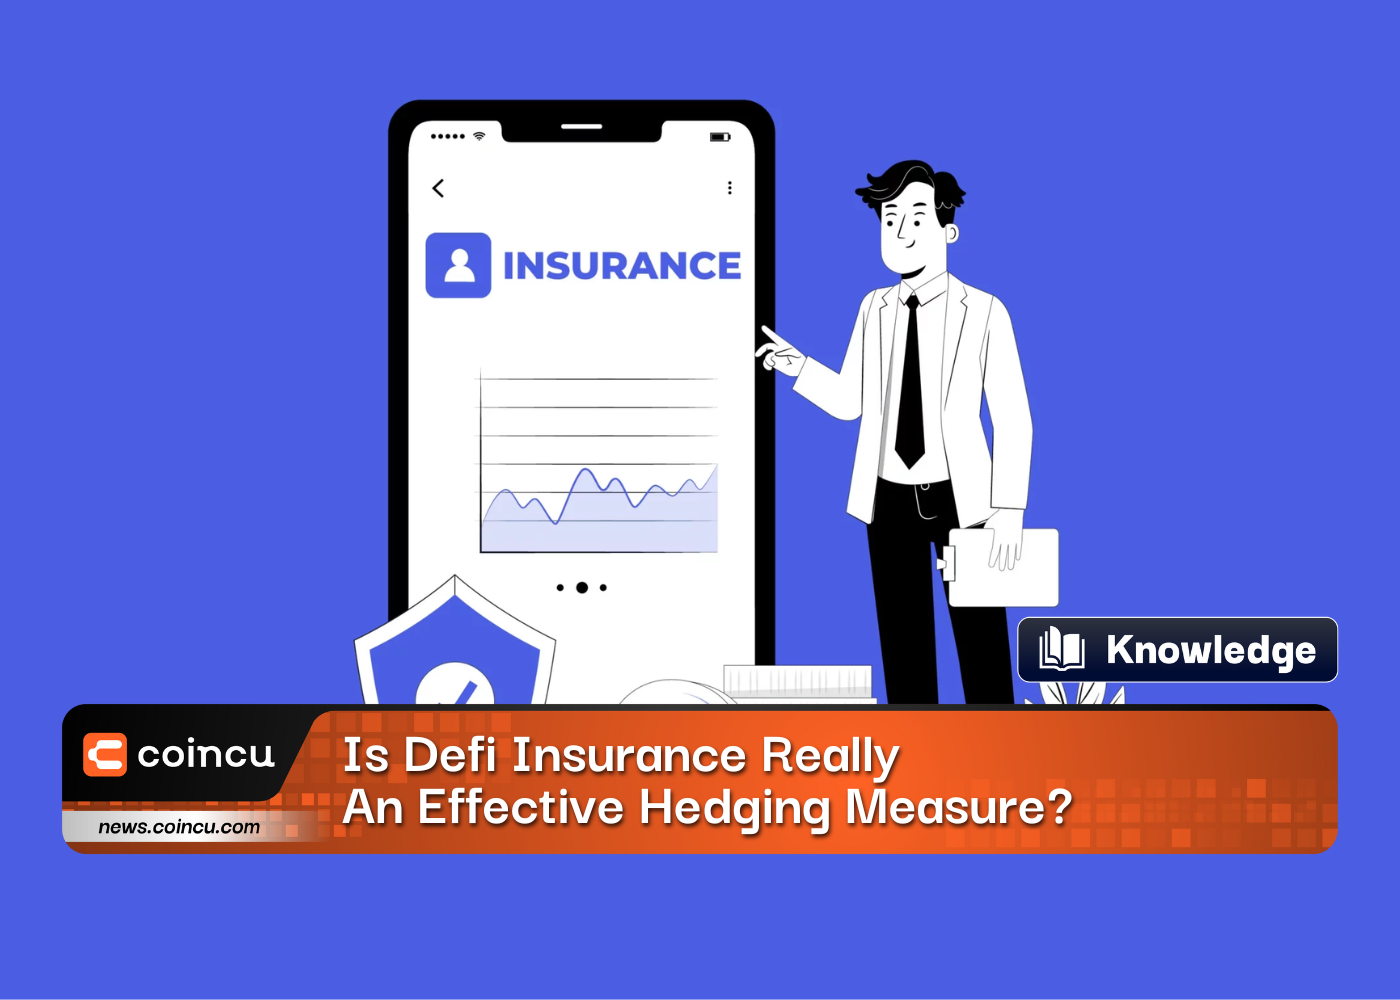 Is Defi Insurance Really An Effective Hedging Measure?